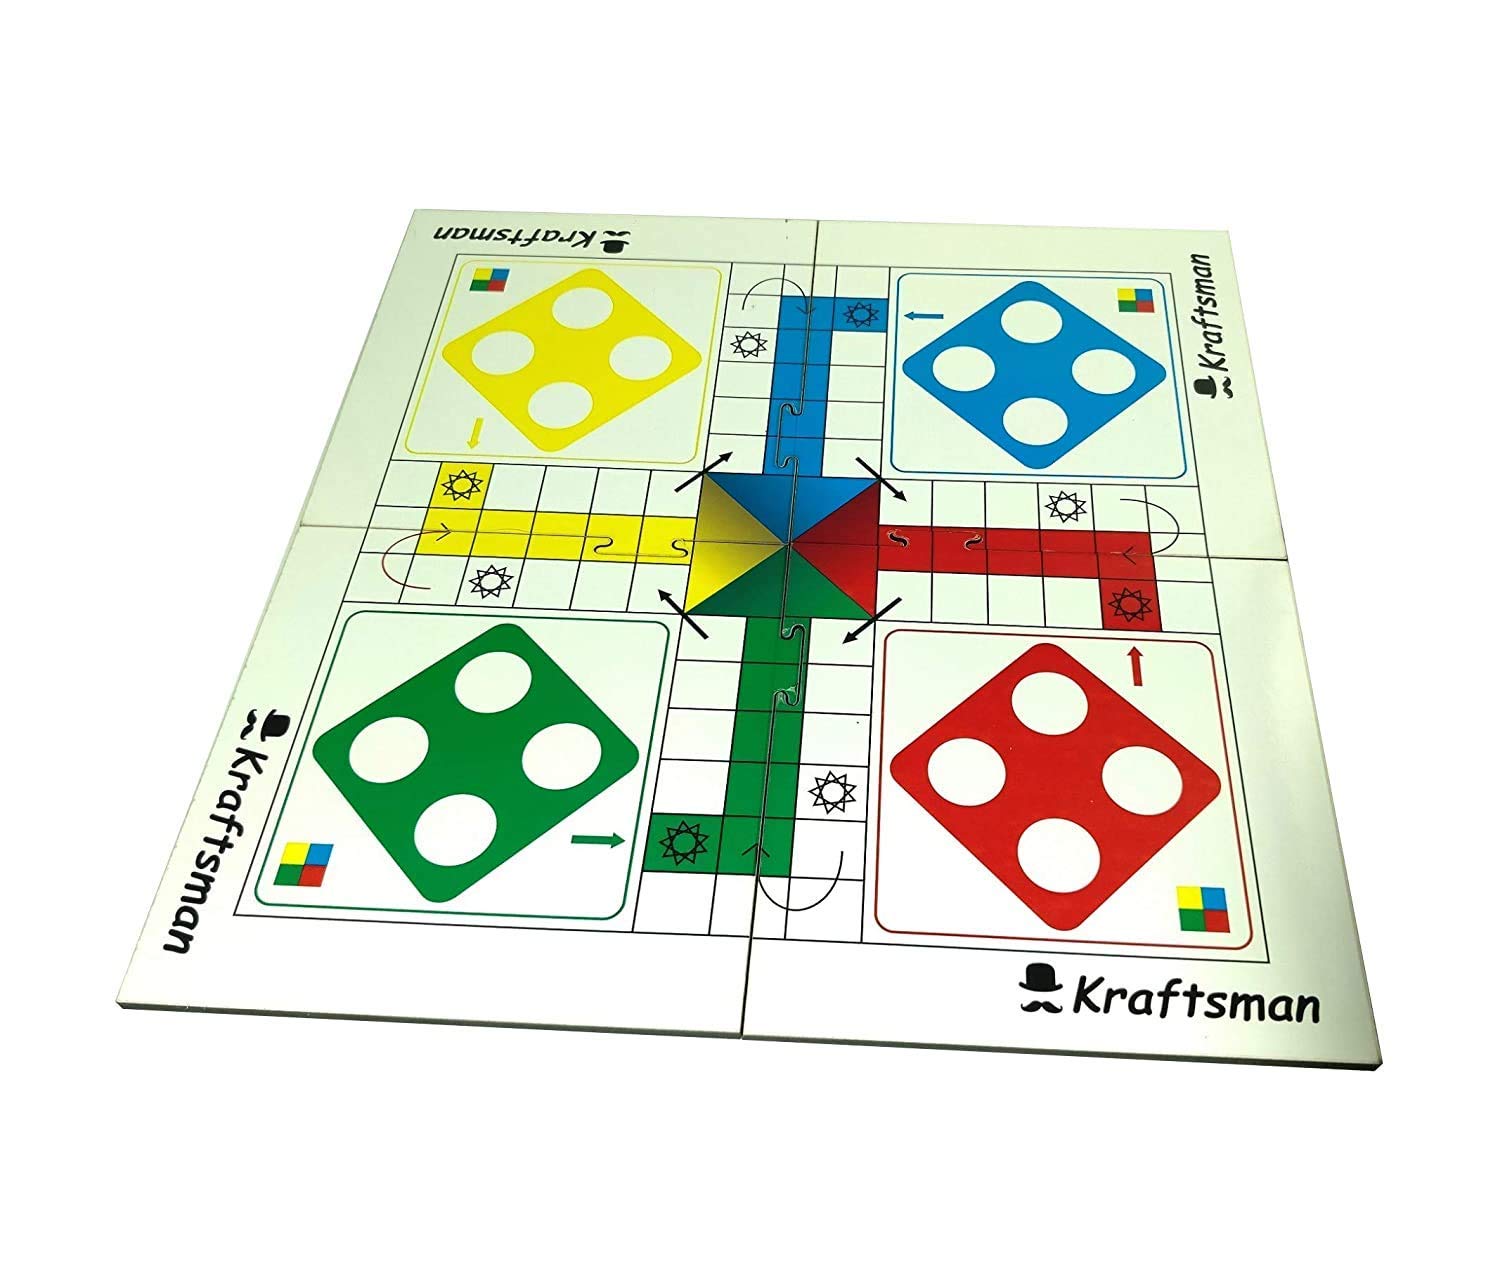 Best Portable wooden board game Easy to carry anywhere you travel, small in size with travel pouch included to safe guard the objects to get lost Develops logical thinking and curiosity development and makes a awesome gift for kids & Adults and Return Gifting Good Quality Best option for Gift